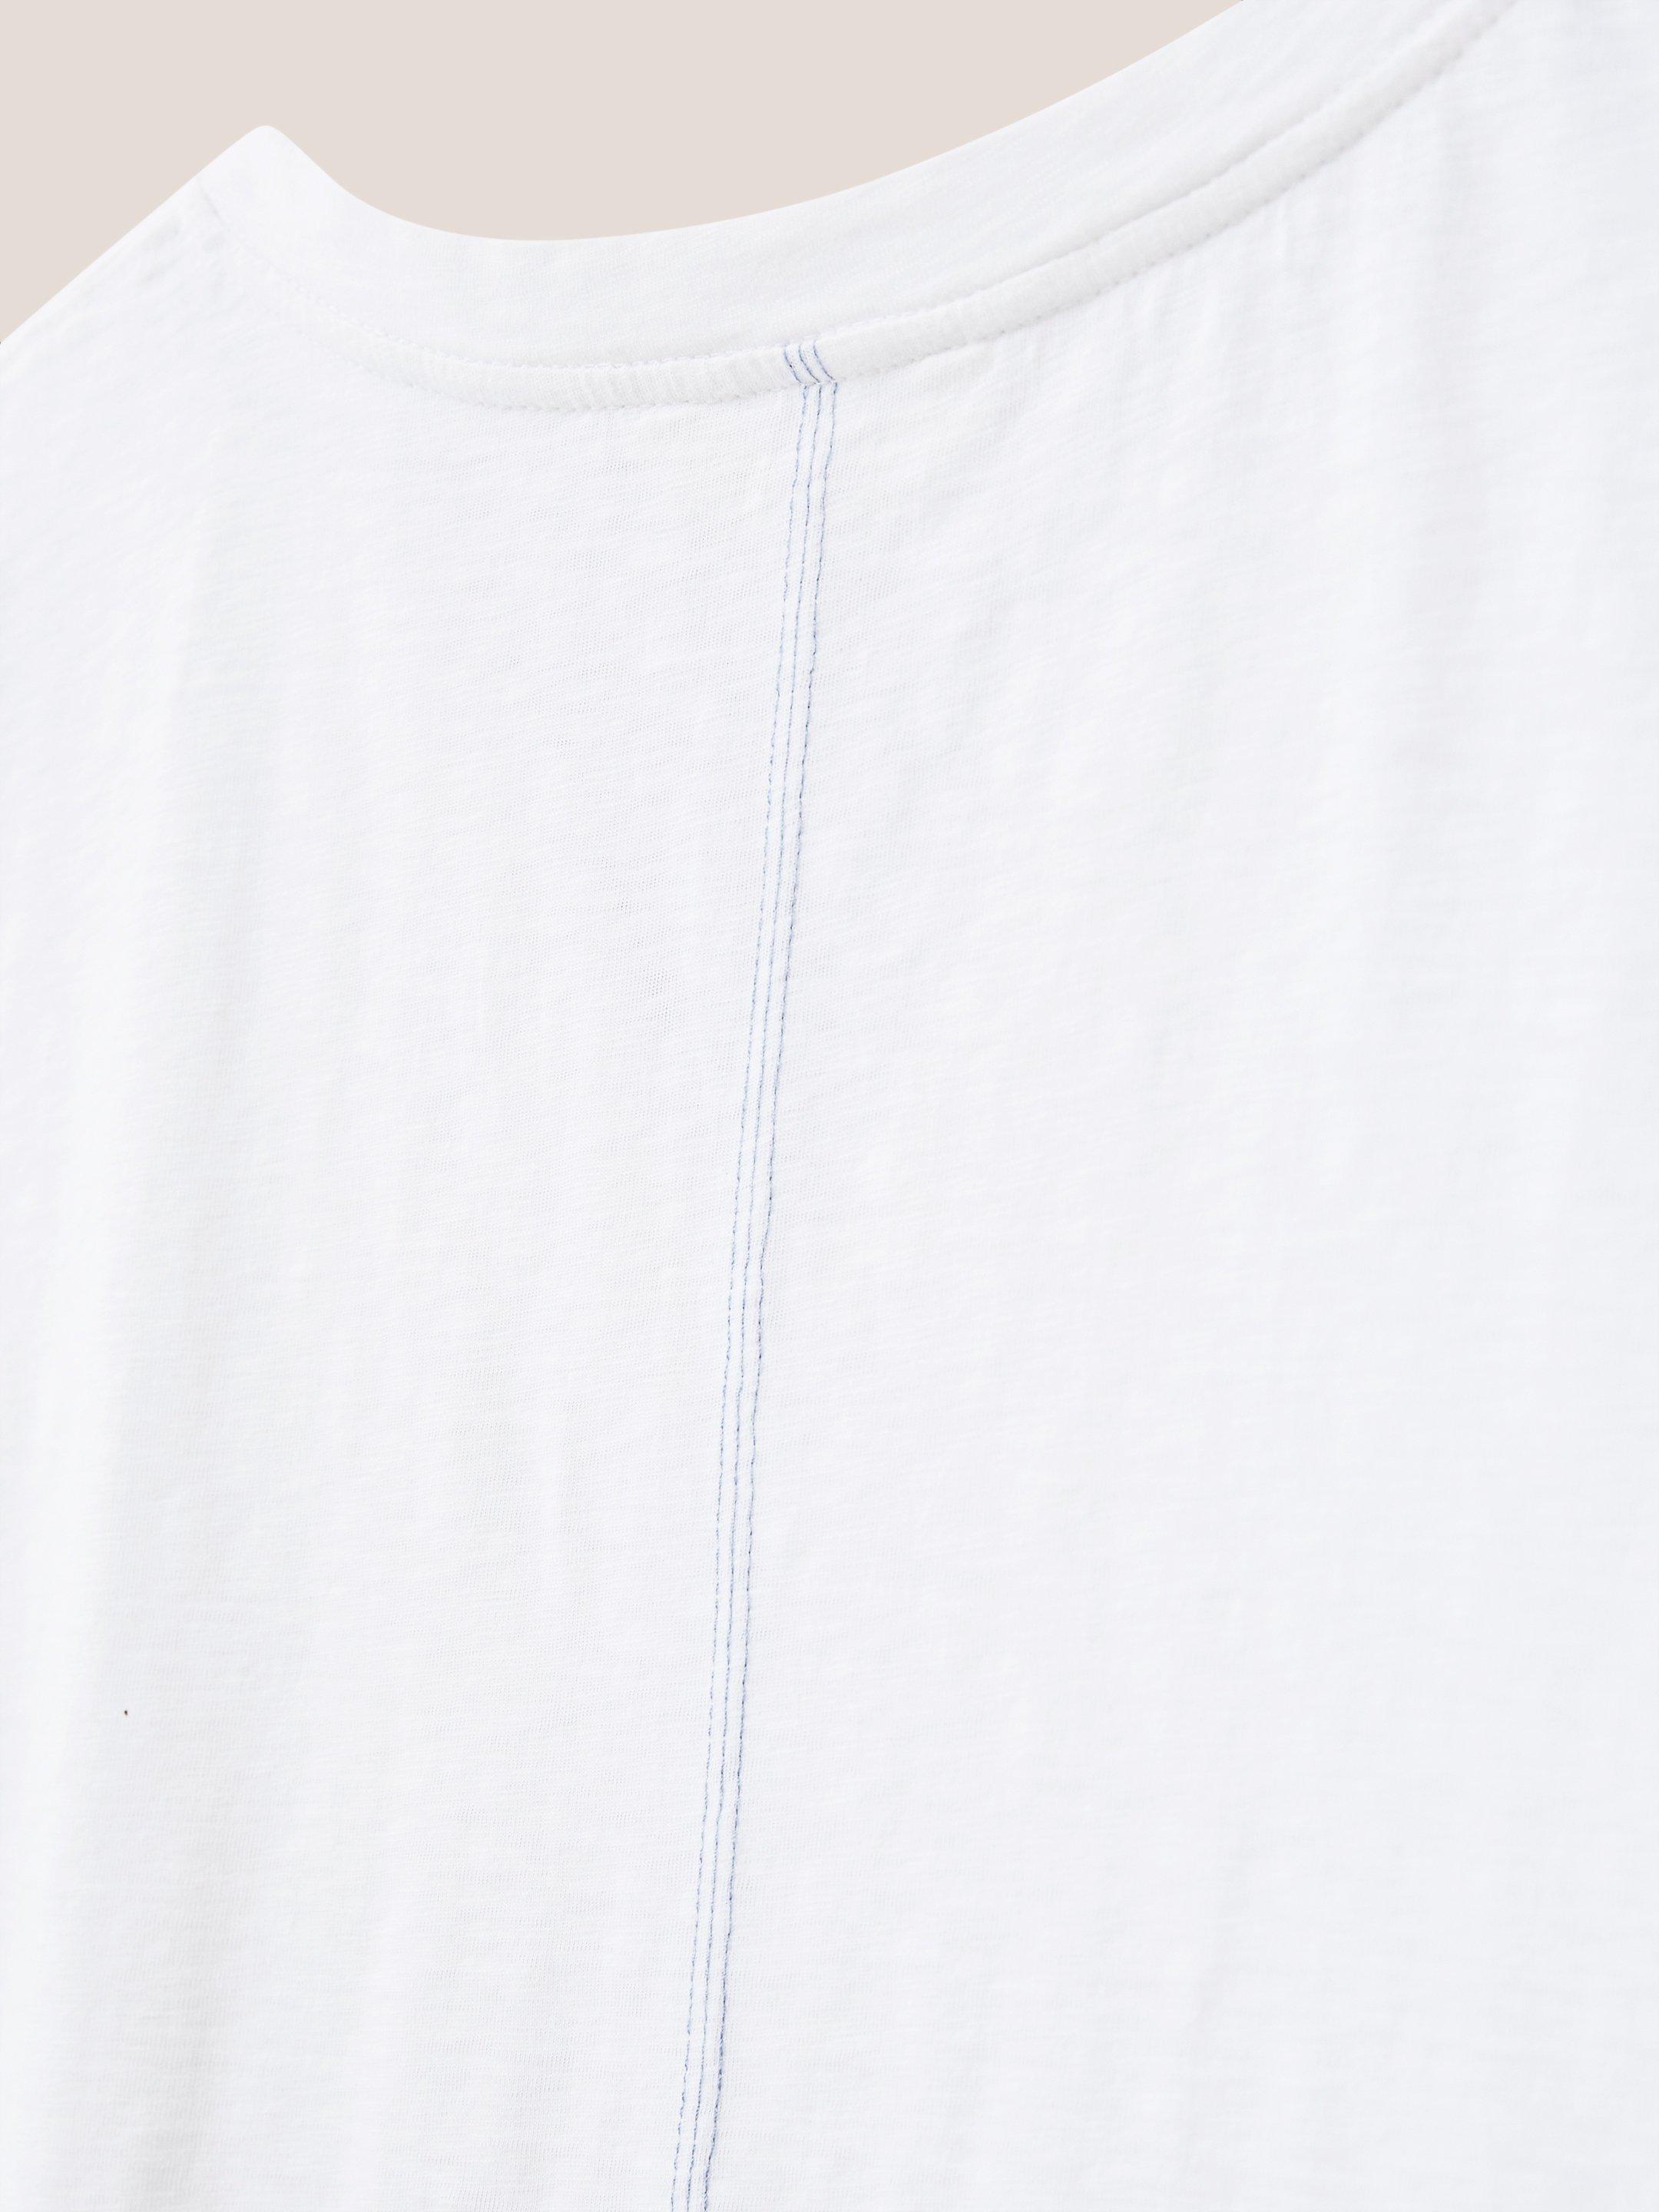 Nelly Notch Tee in BRIL WHITE - FLAT DETAIL